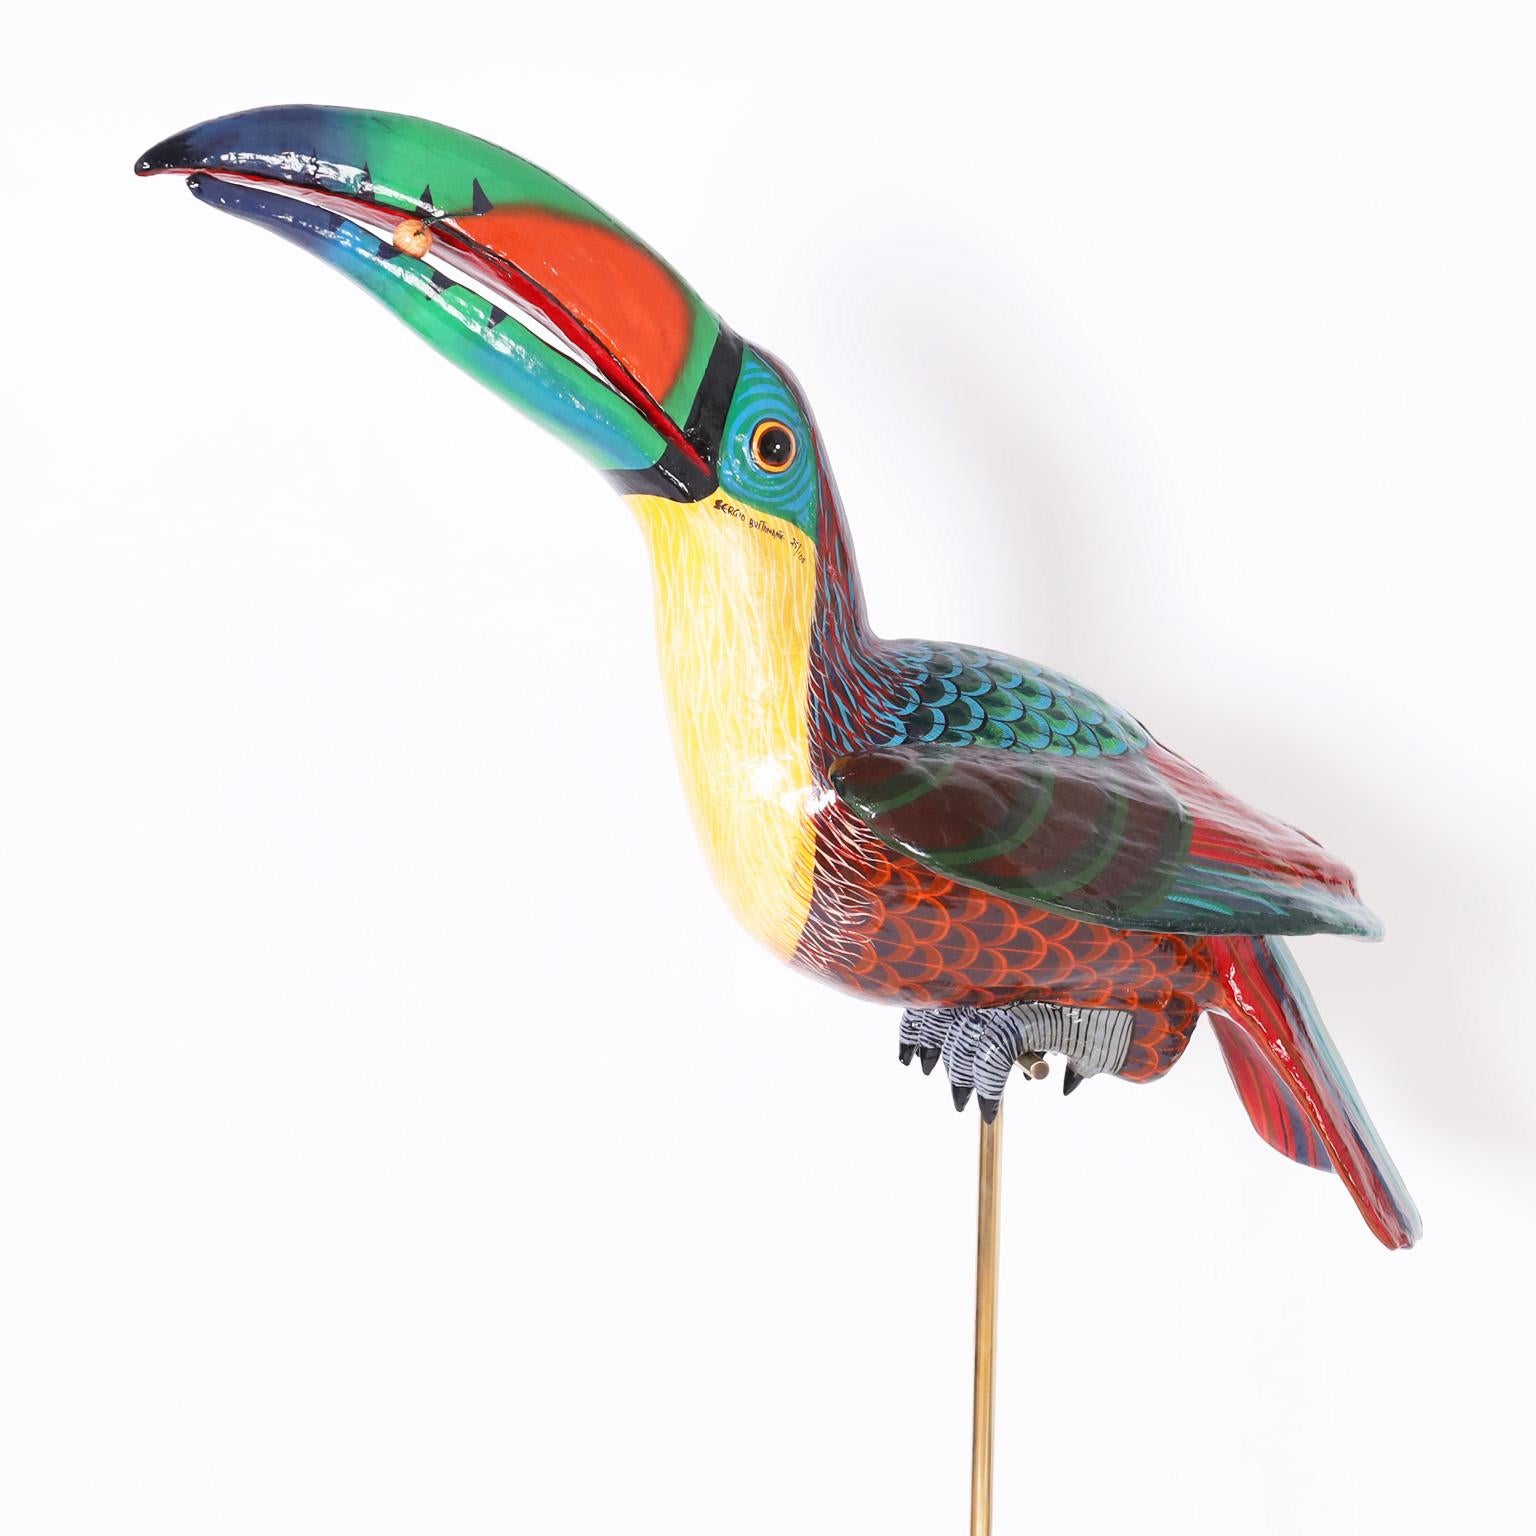 Whimsical mid century toucan sculpture handcrafted in paper mache and decorated in bold tropical colors signed Sergio Bustamante, numbered 25/100 and presented on a brass stand.